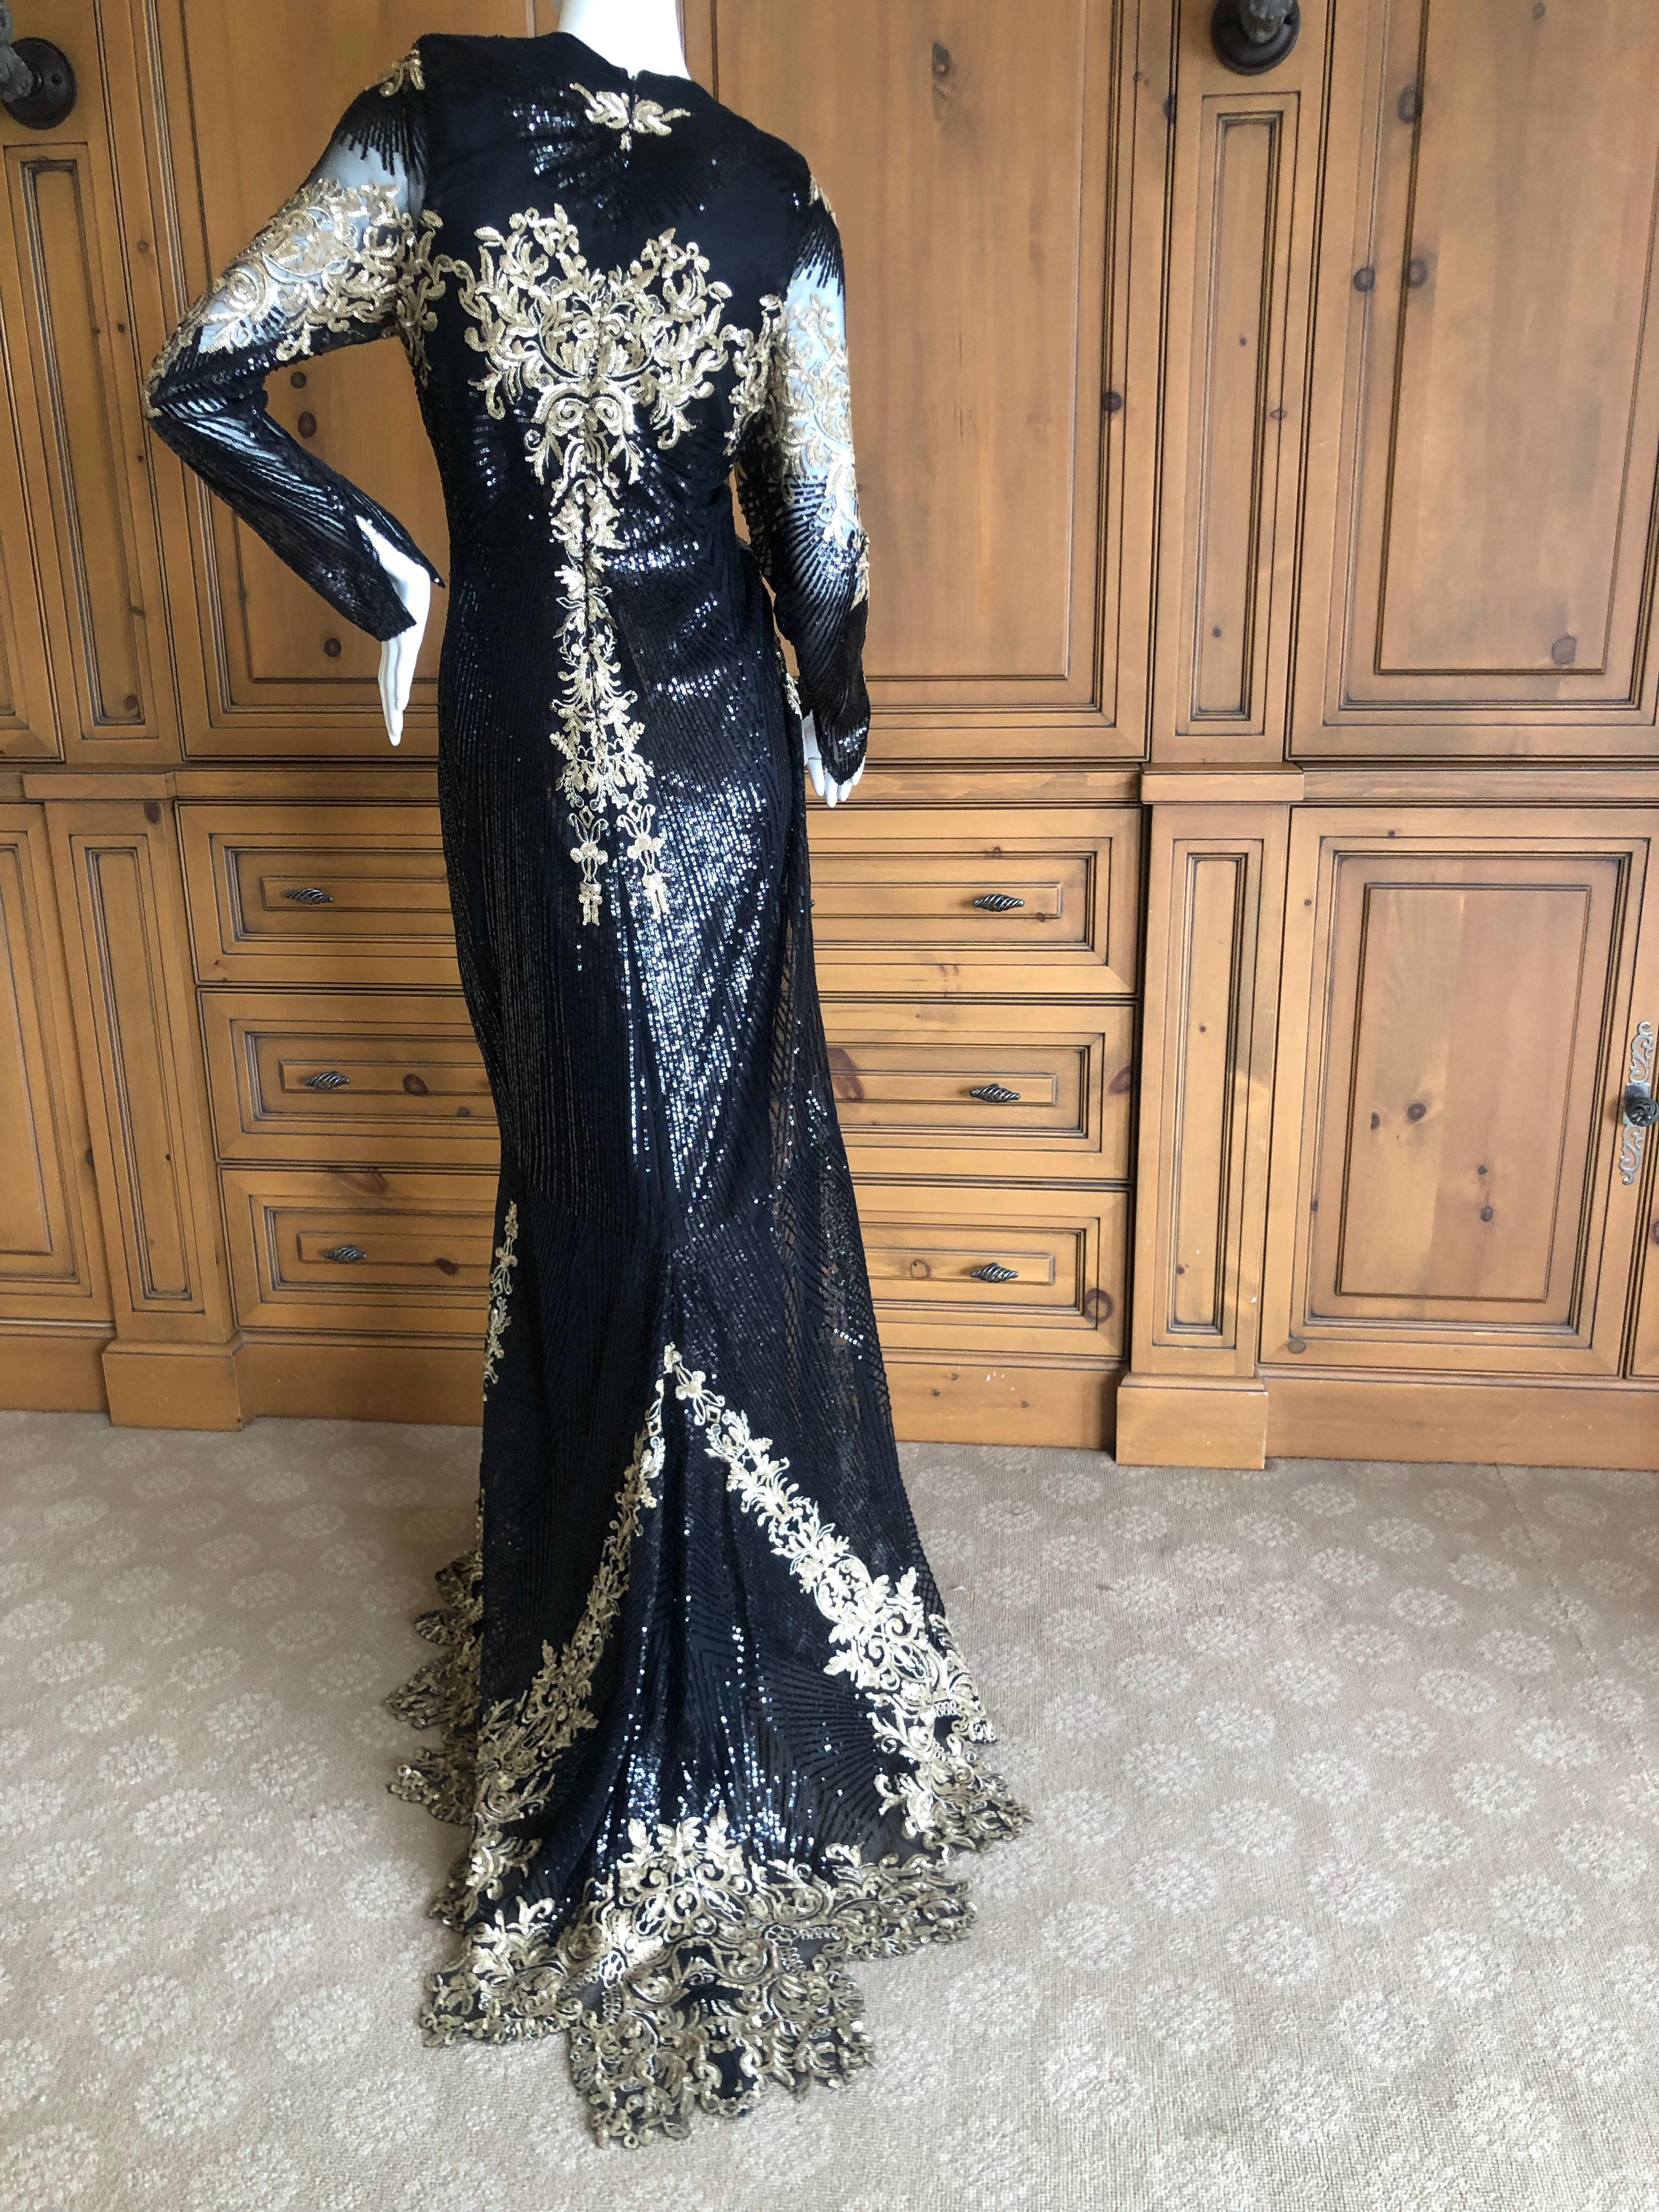 Christian Siriano Exquisitely Embellished Black and Gold Evening Dress w Train L In Excellent Condition For Sale In Cloverdale, CA